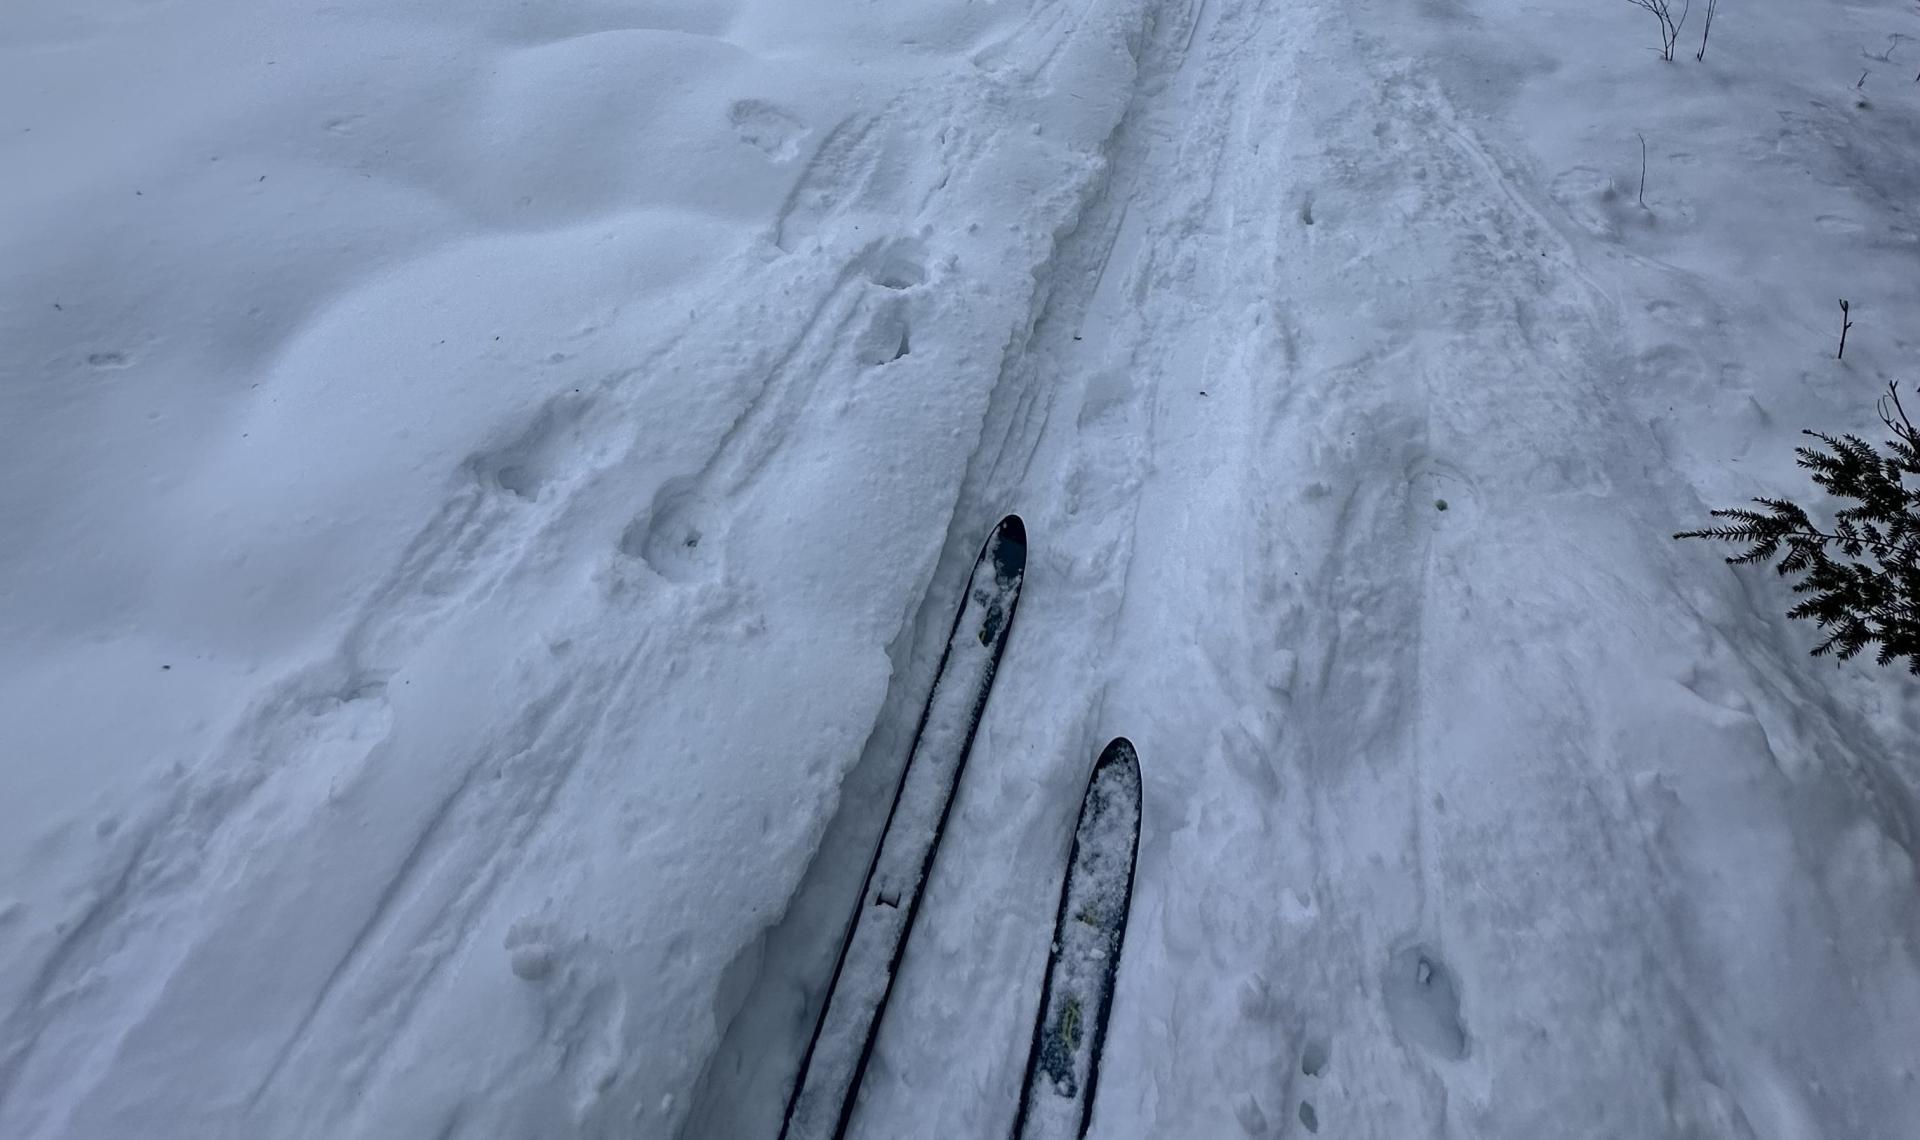 Skiing on Benny's Trail